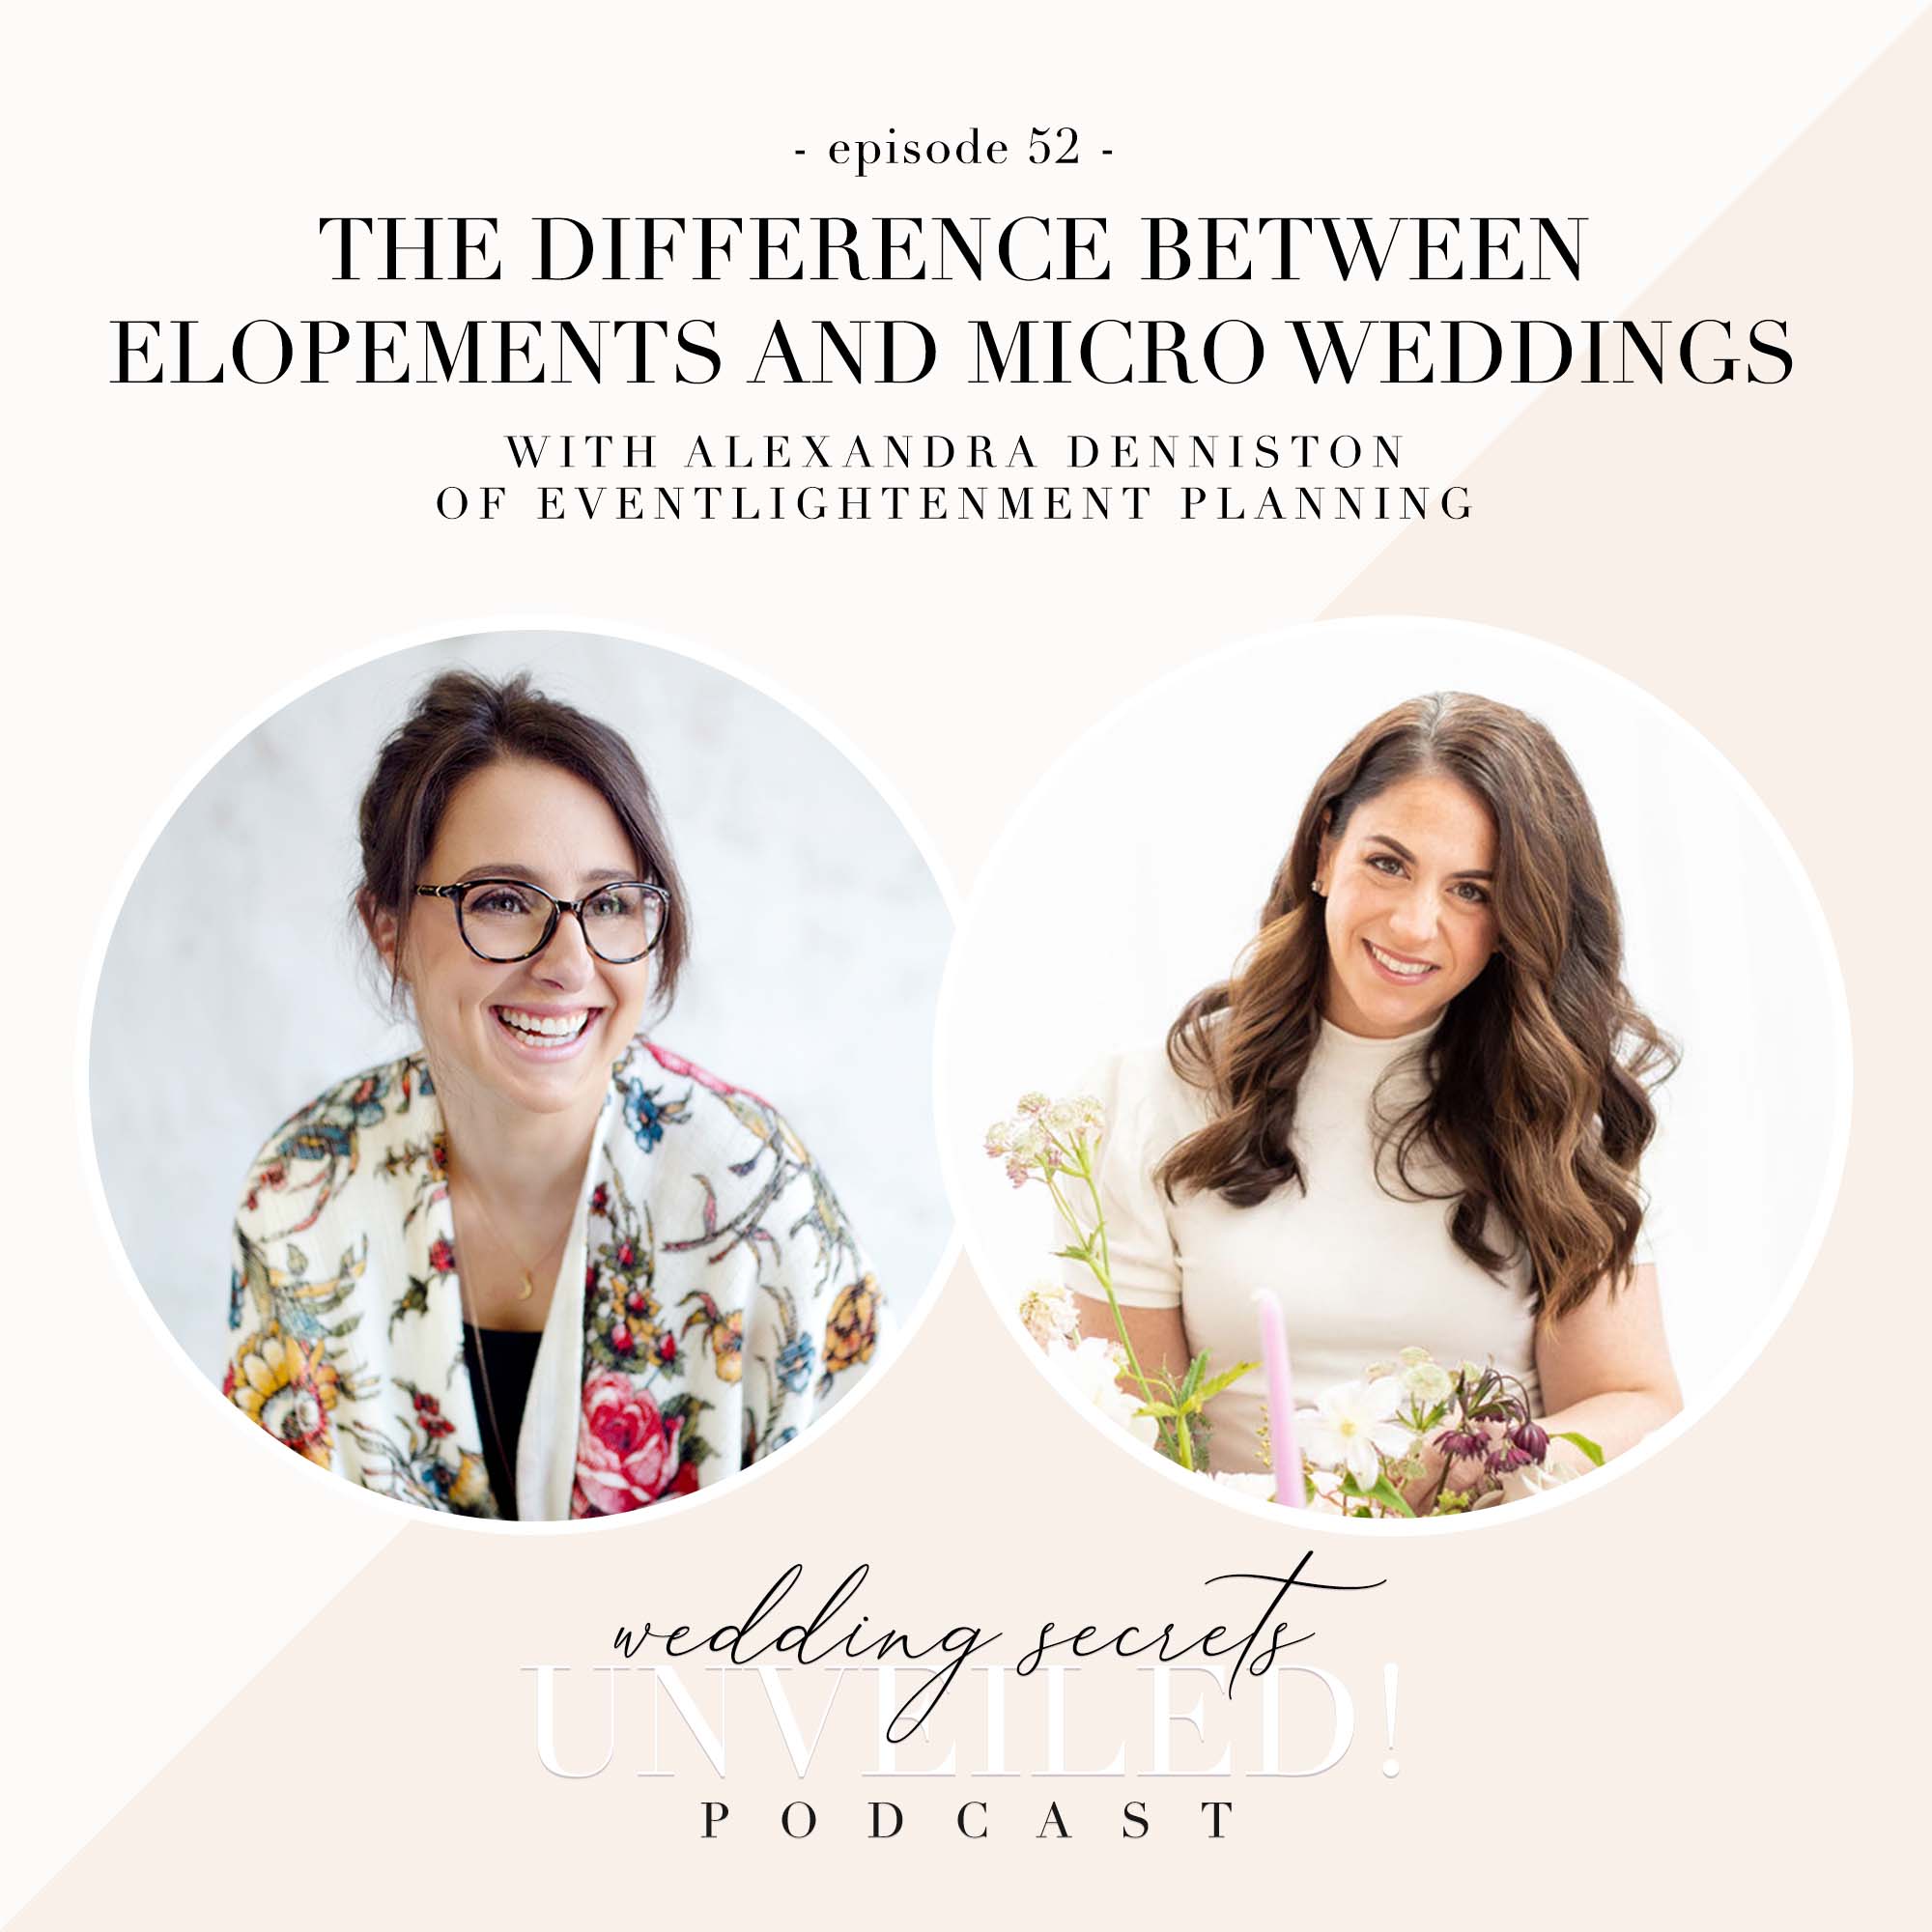 The Difference Between Elopements and Micro Weddings: Alexandra of Eventlightenment Planning shares how to decide for your dream wedding